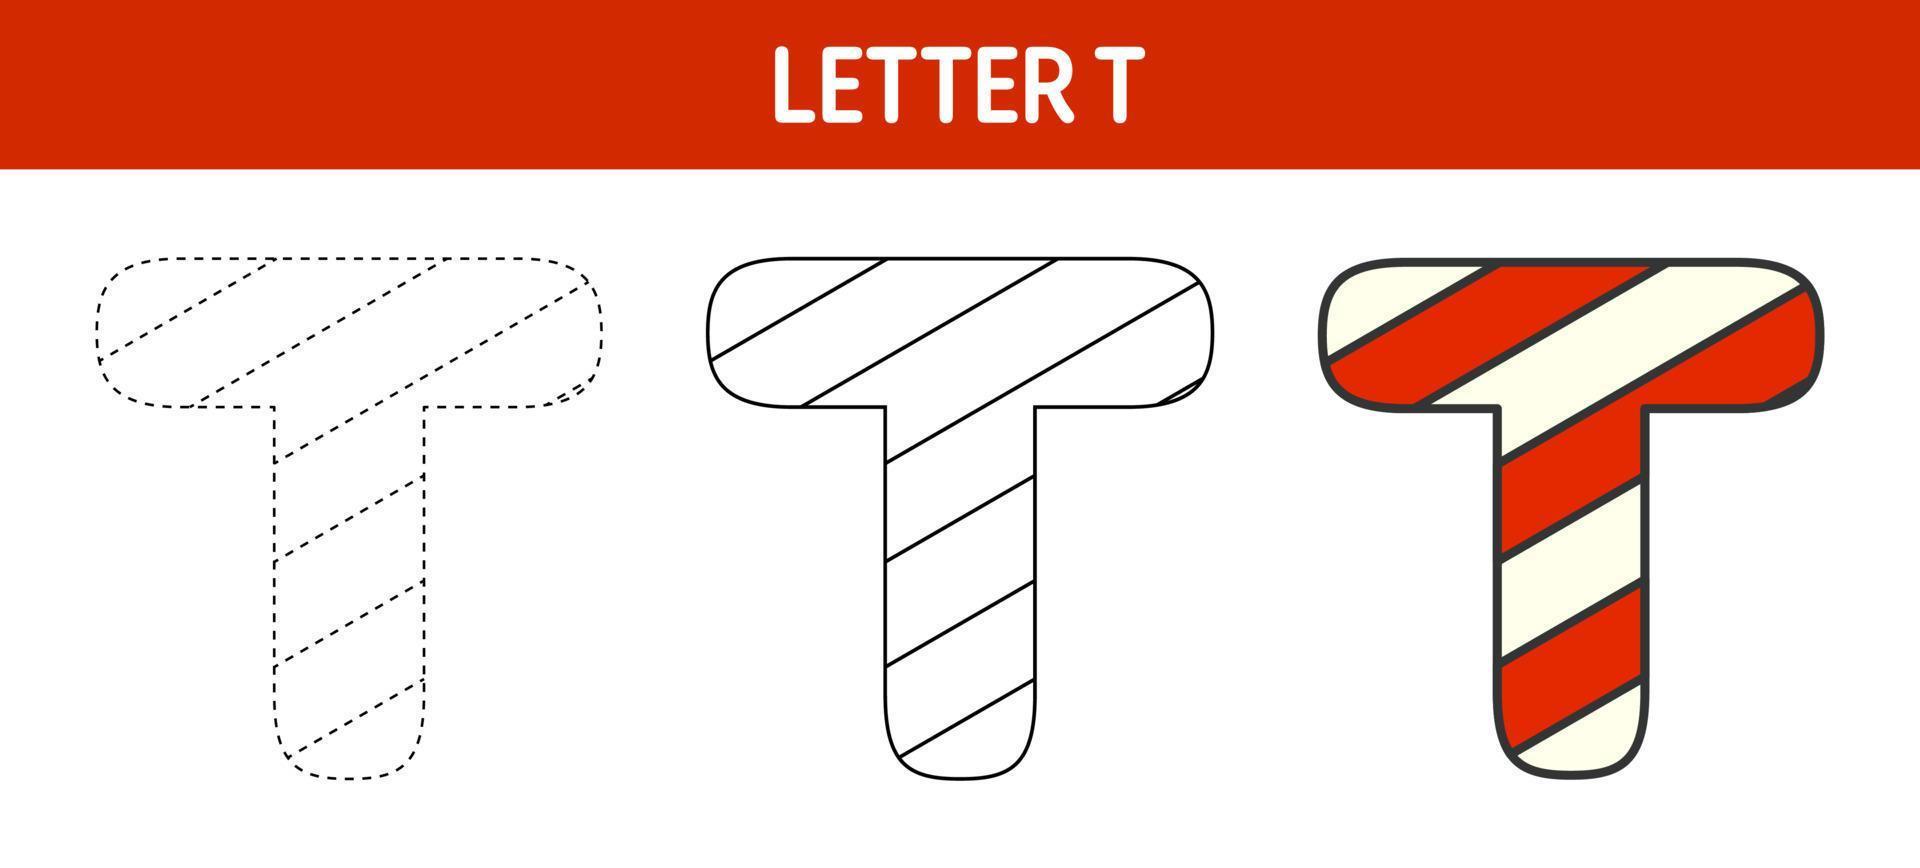 Letter T Candy Cane, tracing and coloring worksheet for kids vector